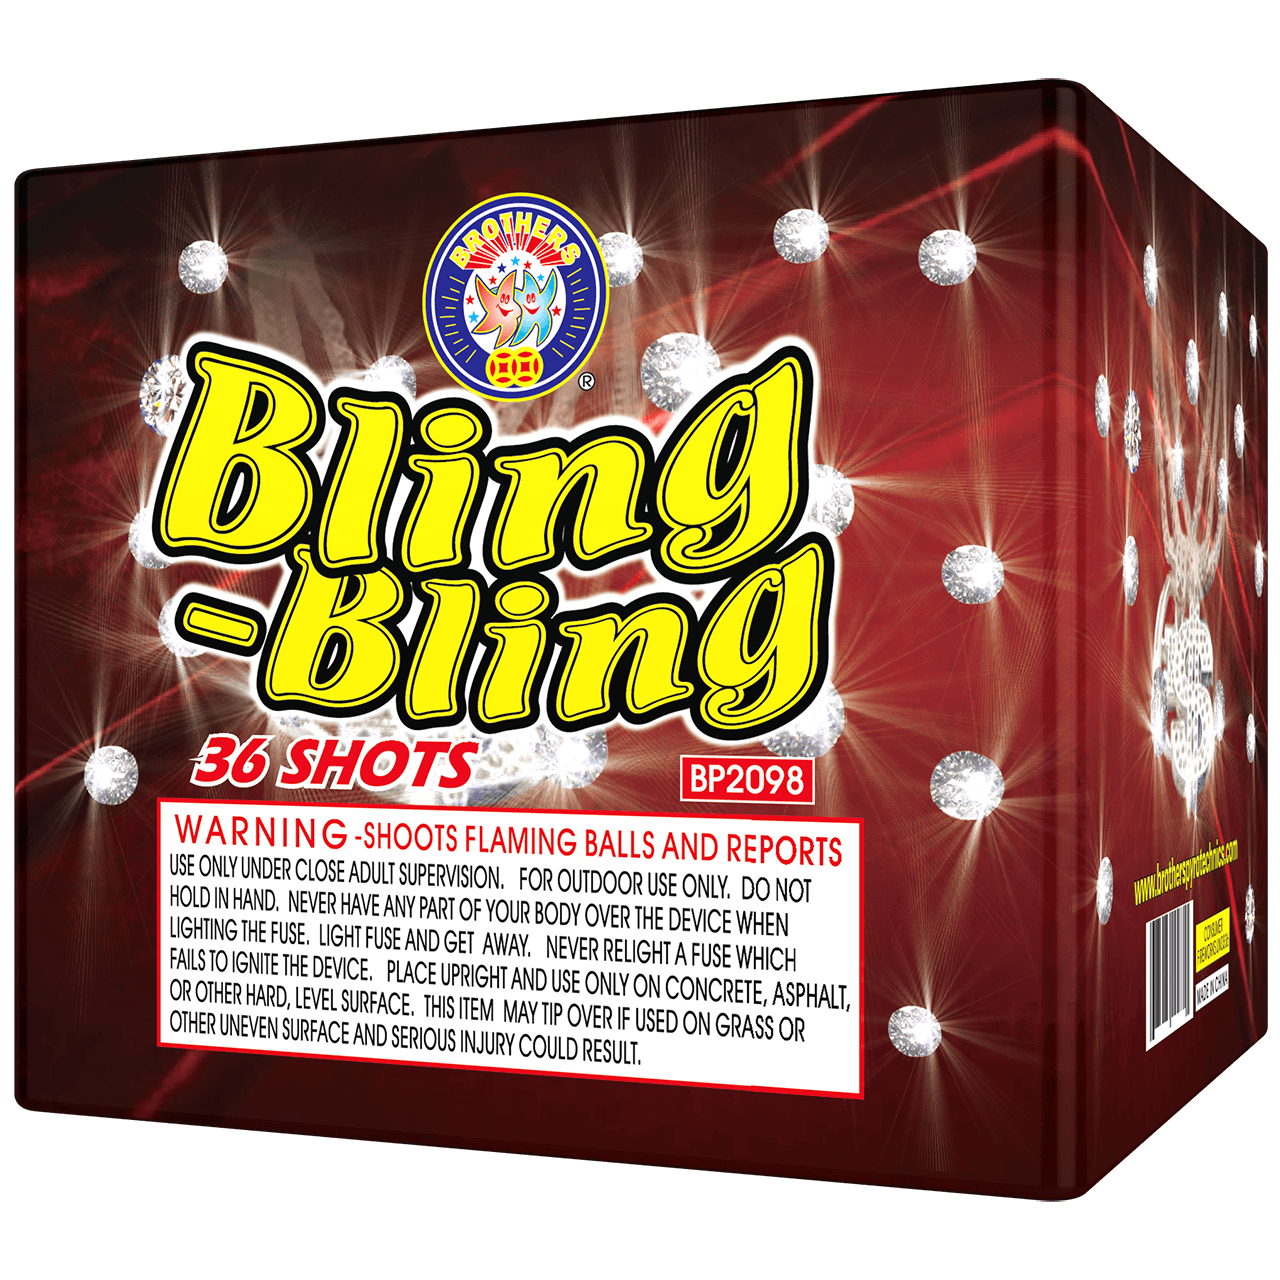 Bling Bling 36 Shots Standard Aerials by Brothers